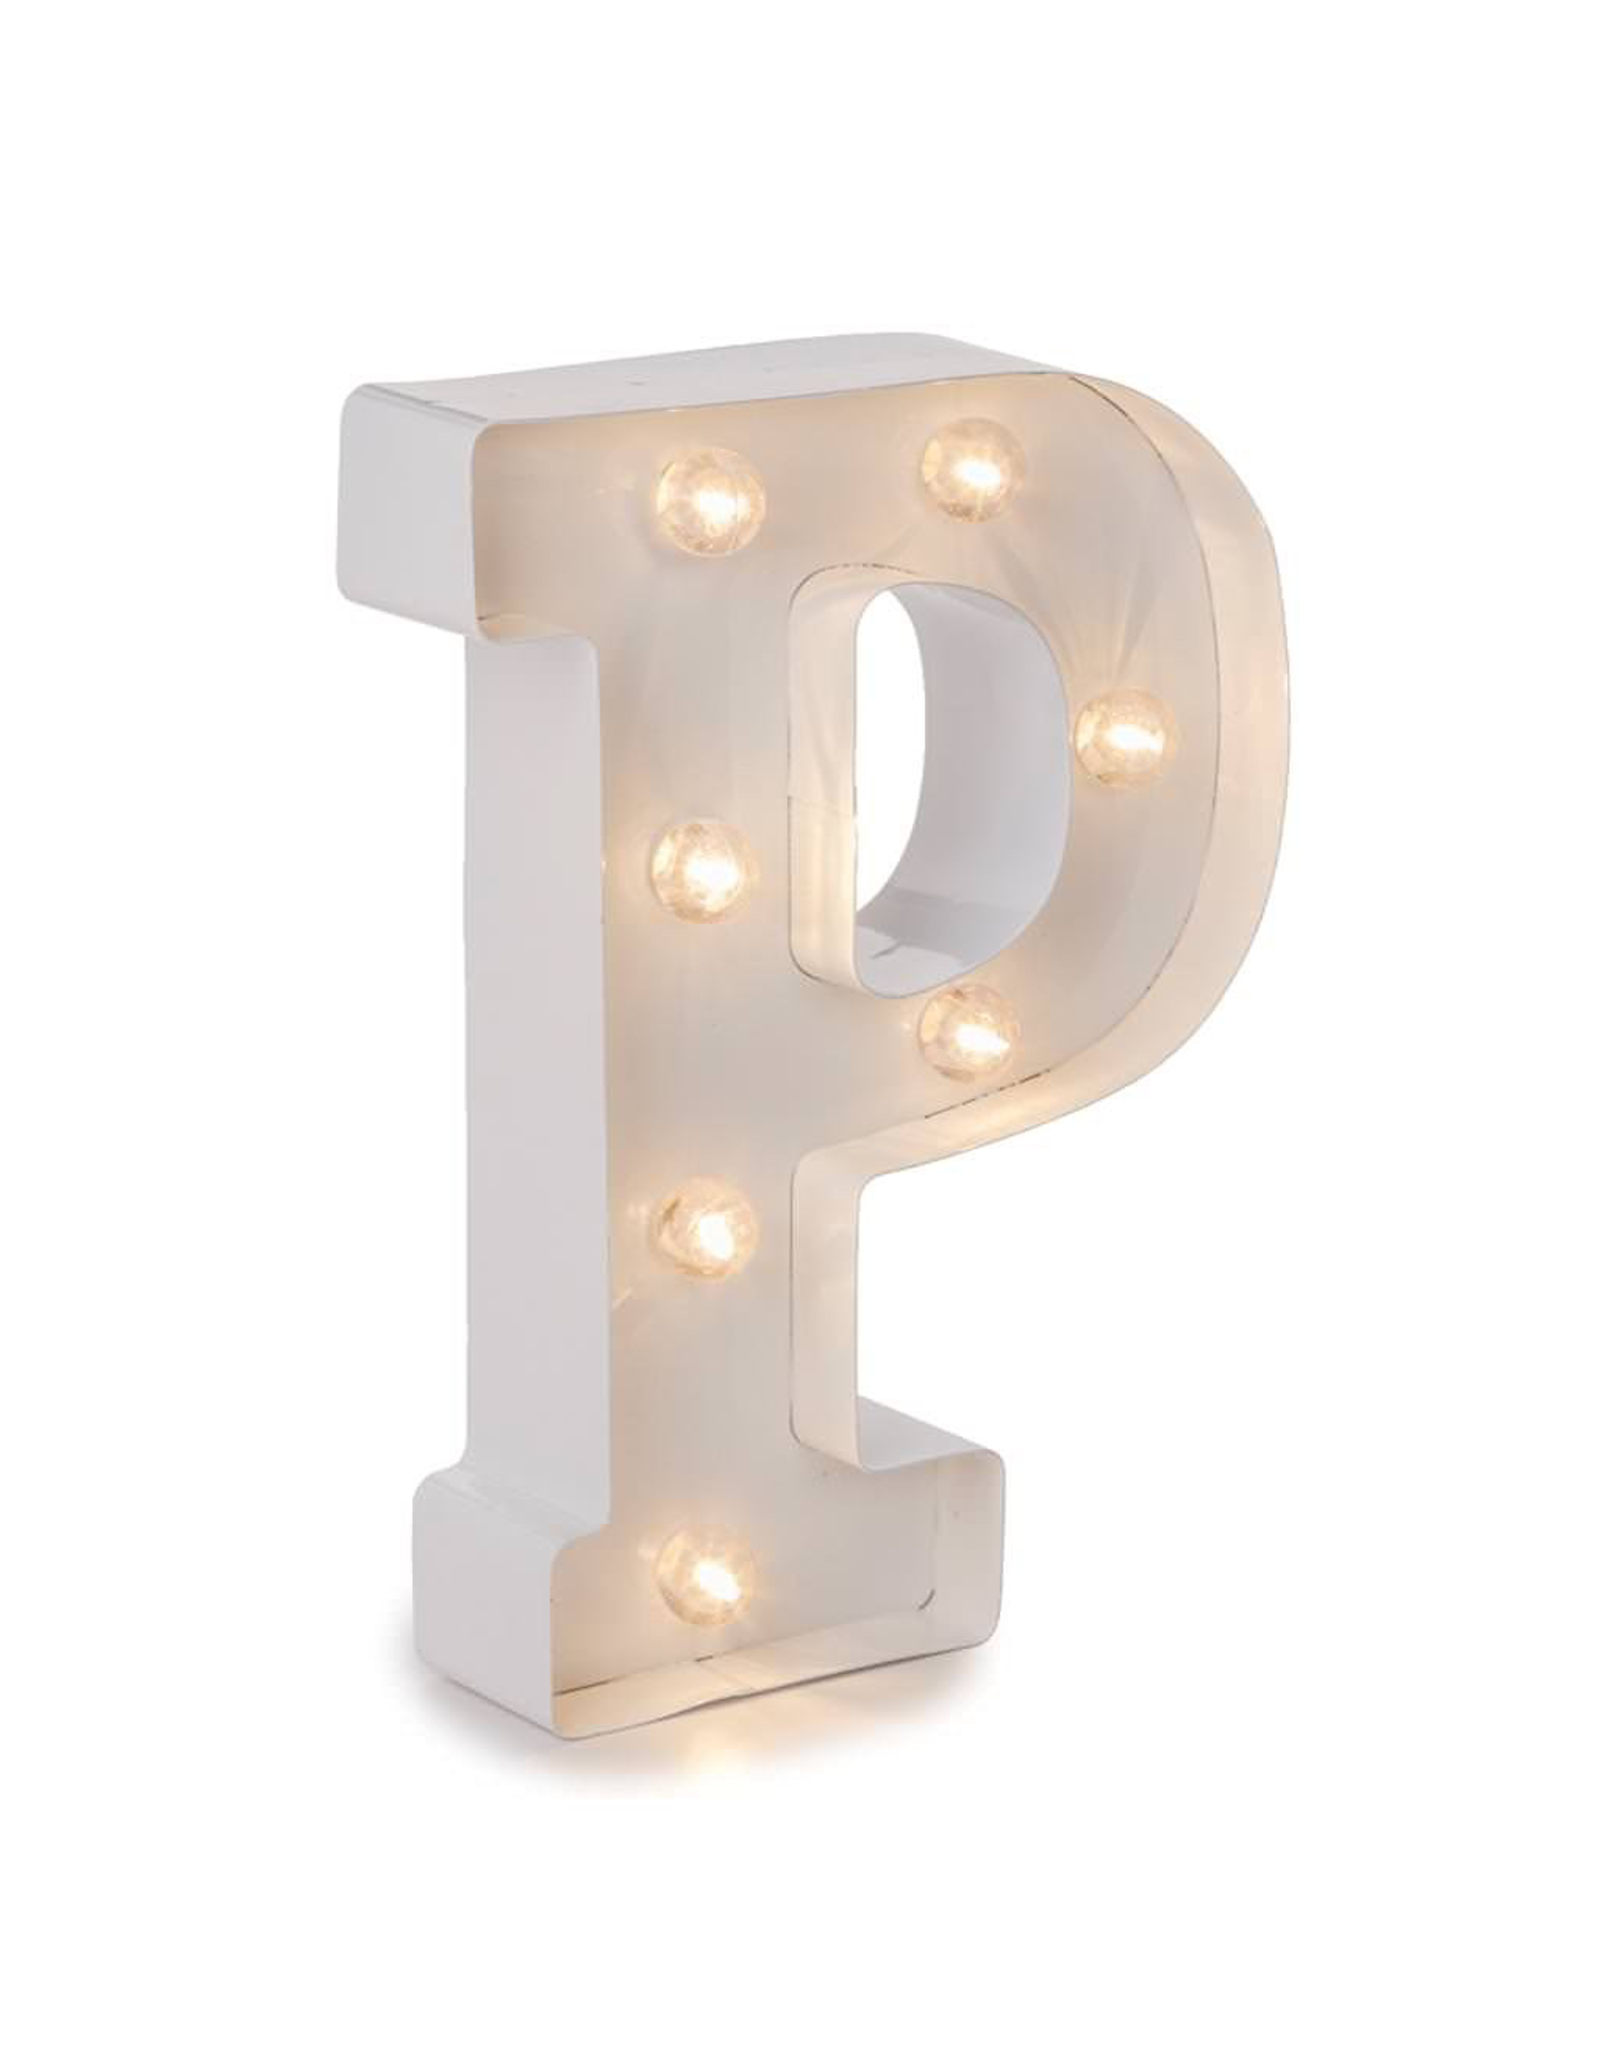 Darice LED Light Up Marquee Letter W 915-750 Galvanized Silver Metal